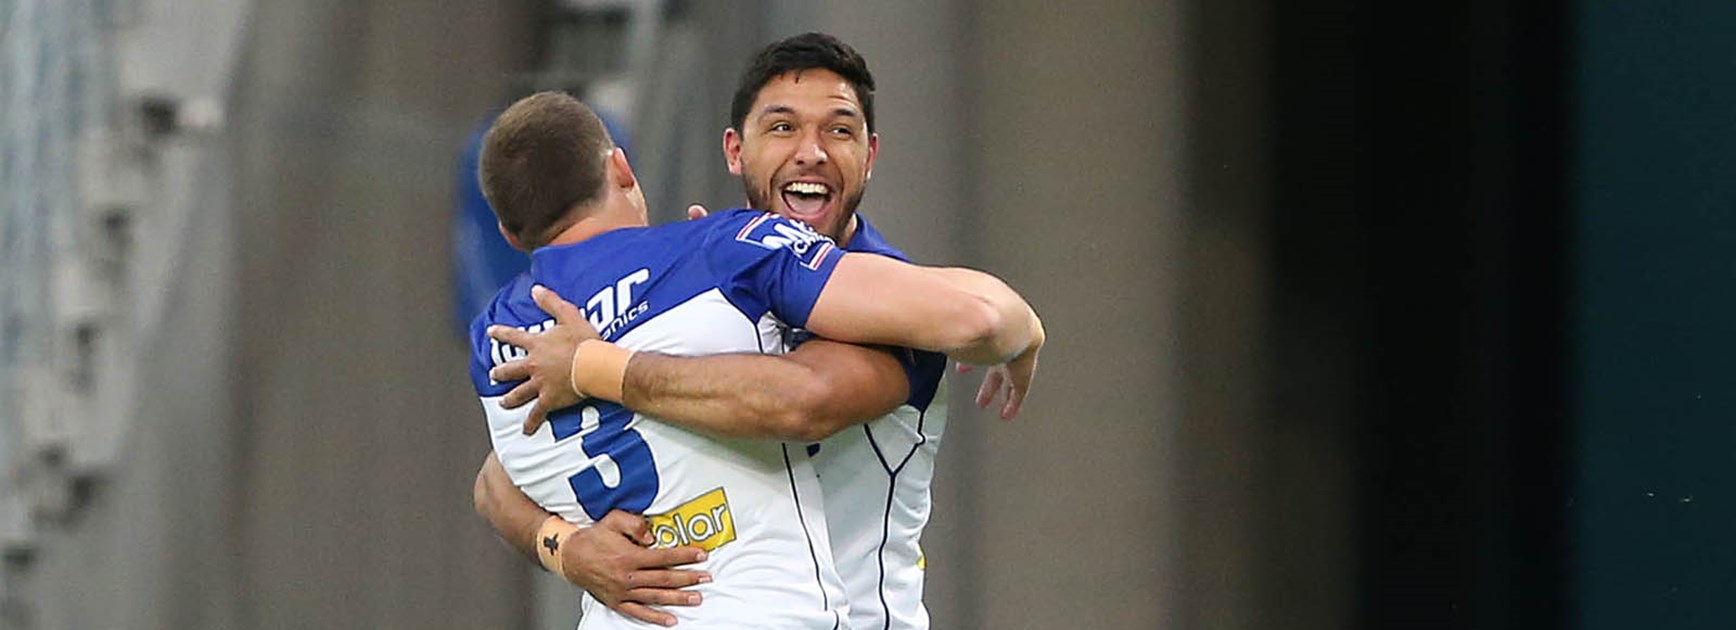 Bulldogs celebrate a try against the Wests Tigers at ANZ Stadium in Round 10.